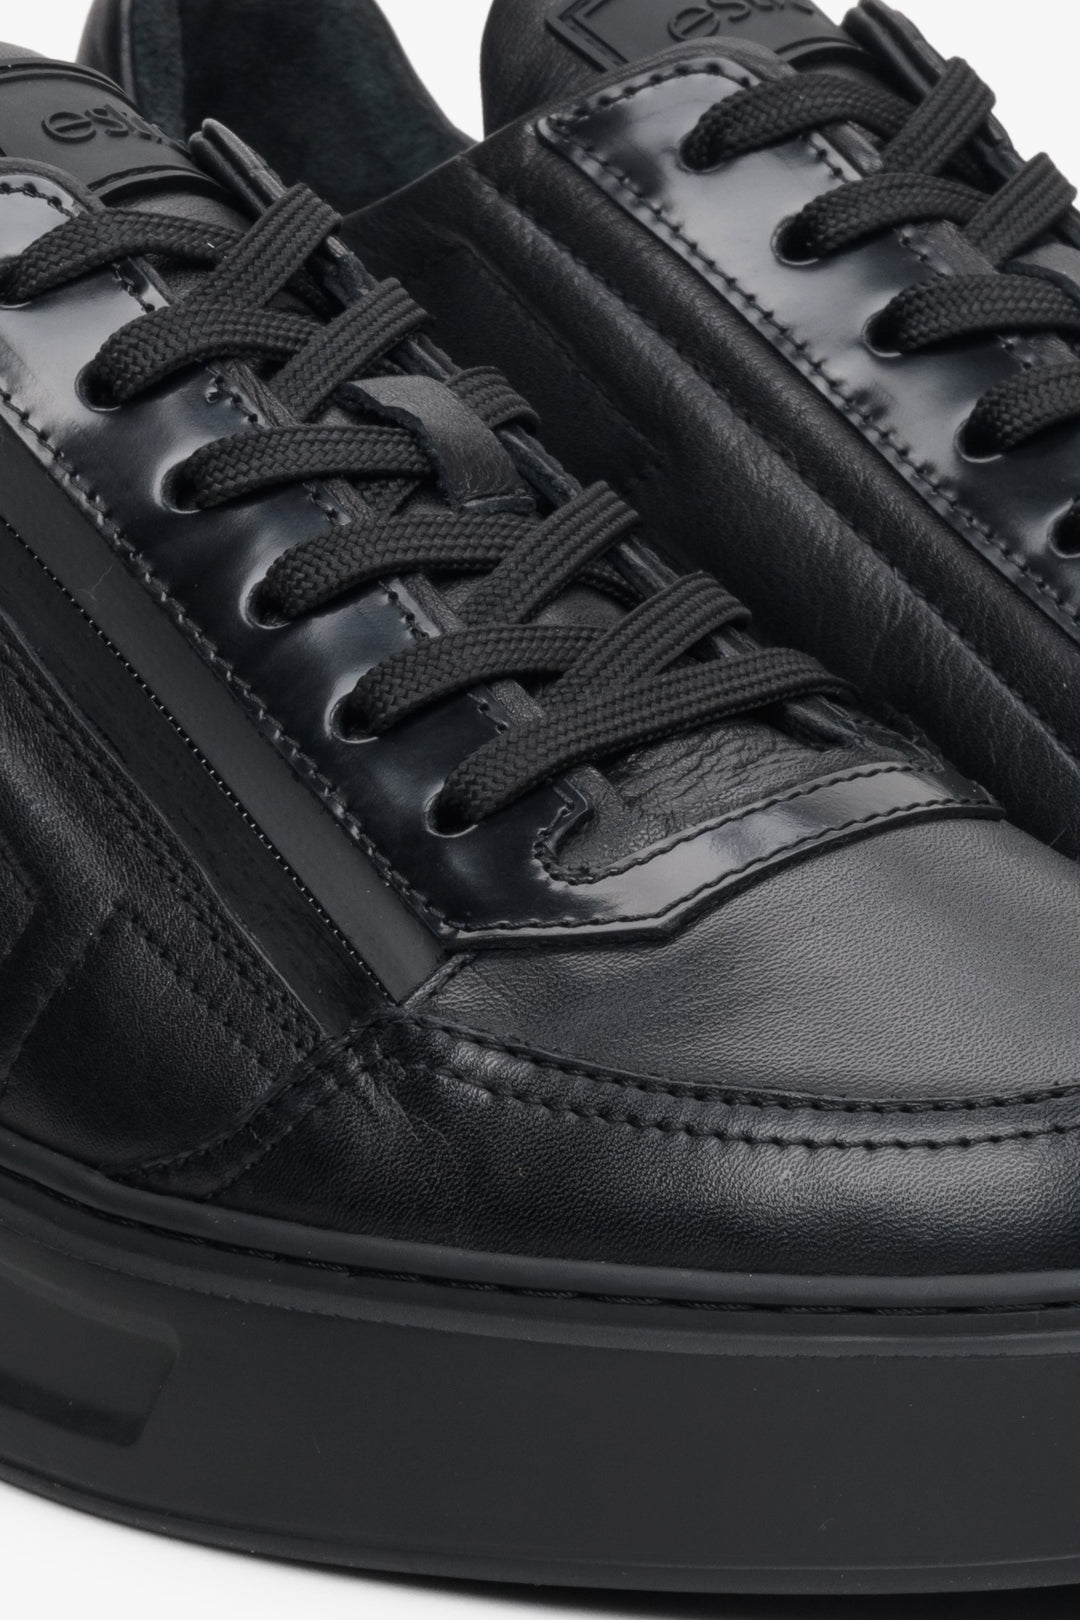 Men's black leather sneakers by Estro - close-up on the detail.